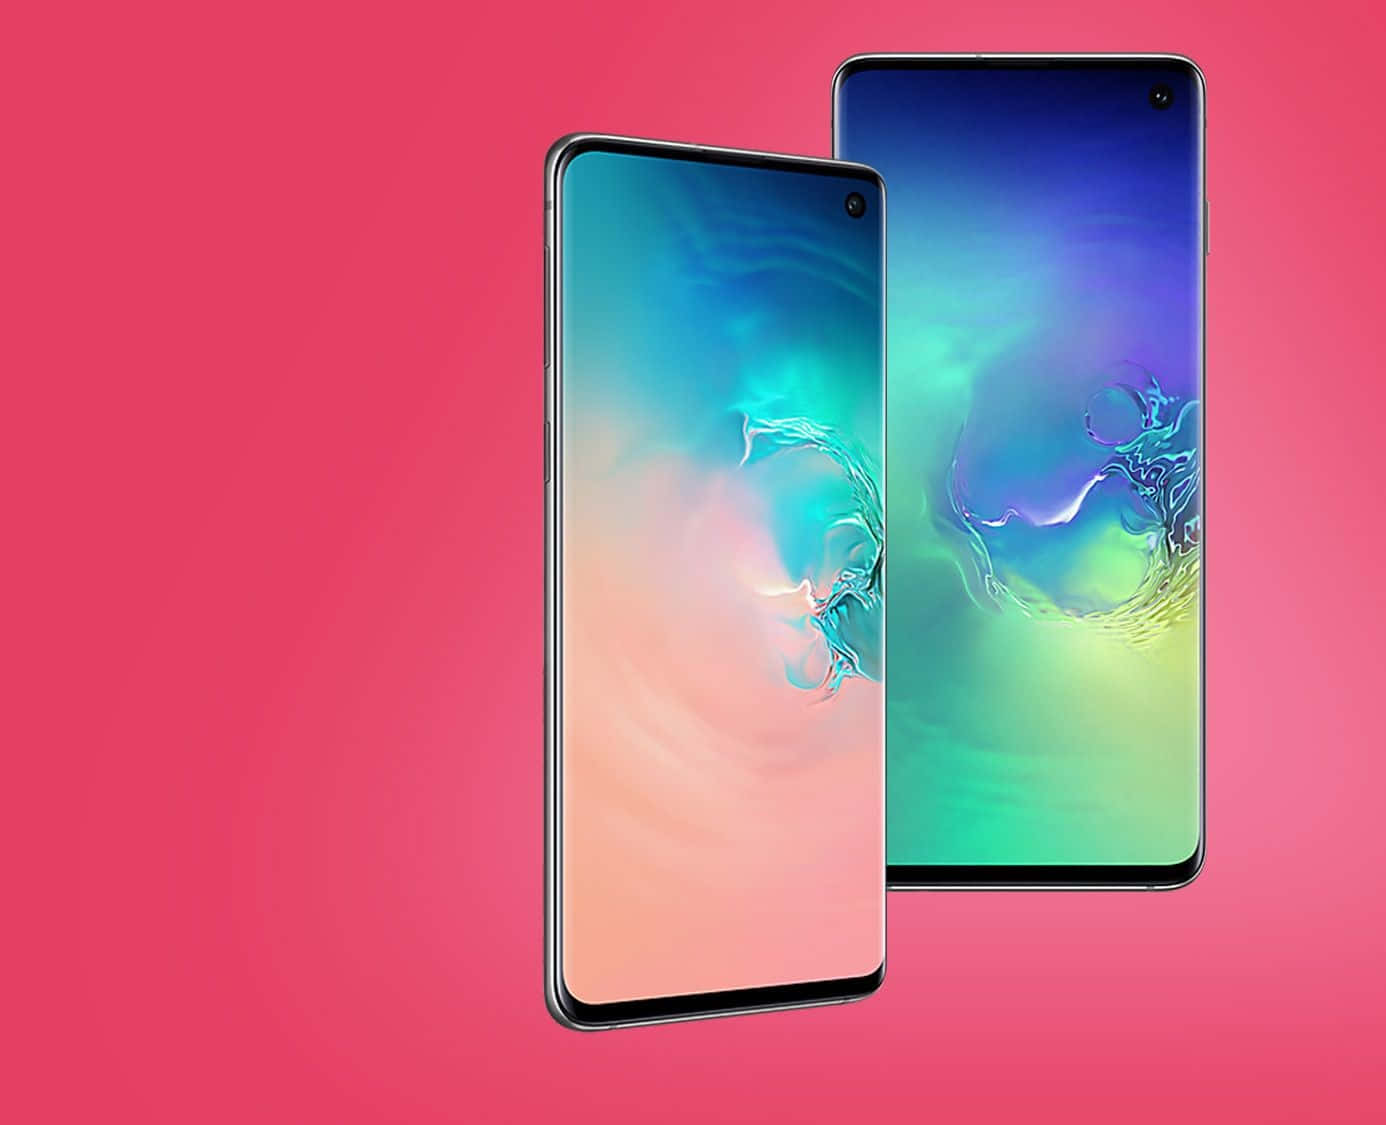 Galaxy S10 Unveiled: Discover the Latest Technology